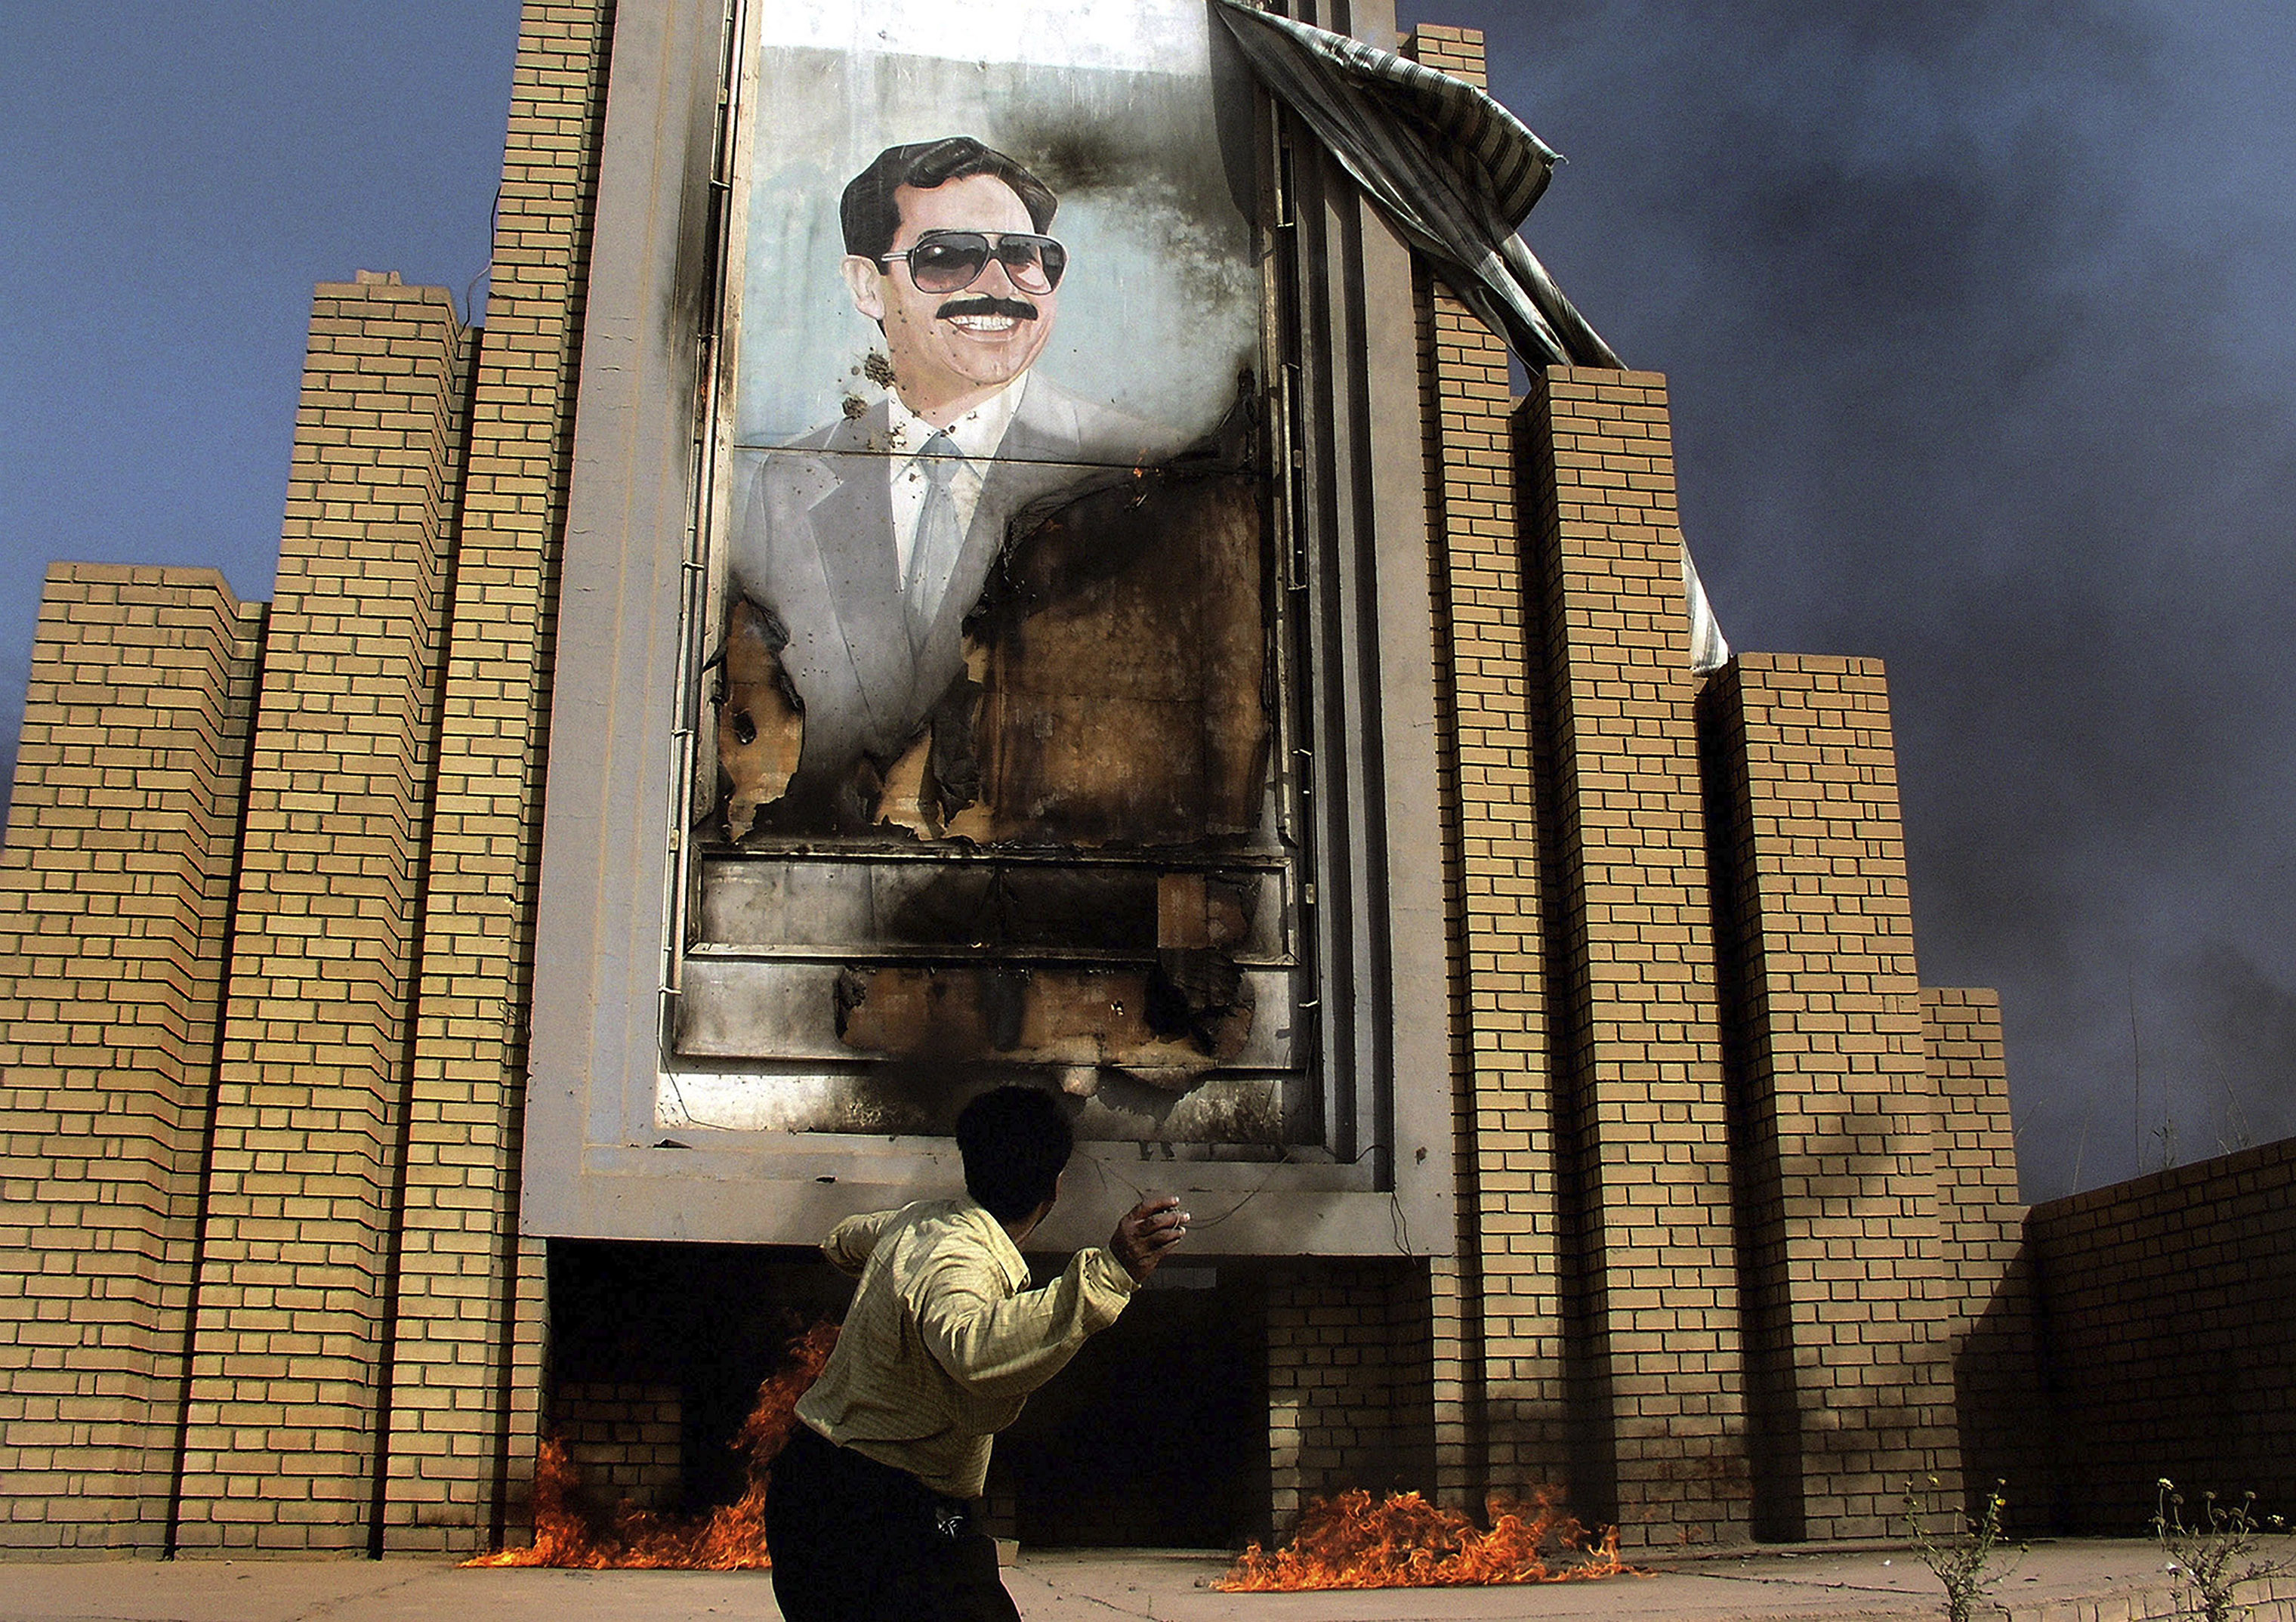 People burn and throw stones at a poster of Saddam Hussein in Baghdad, Iraq, on April 10, 2003. (Alex Majoli—Magnum Photos)